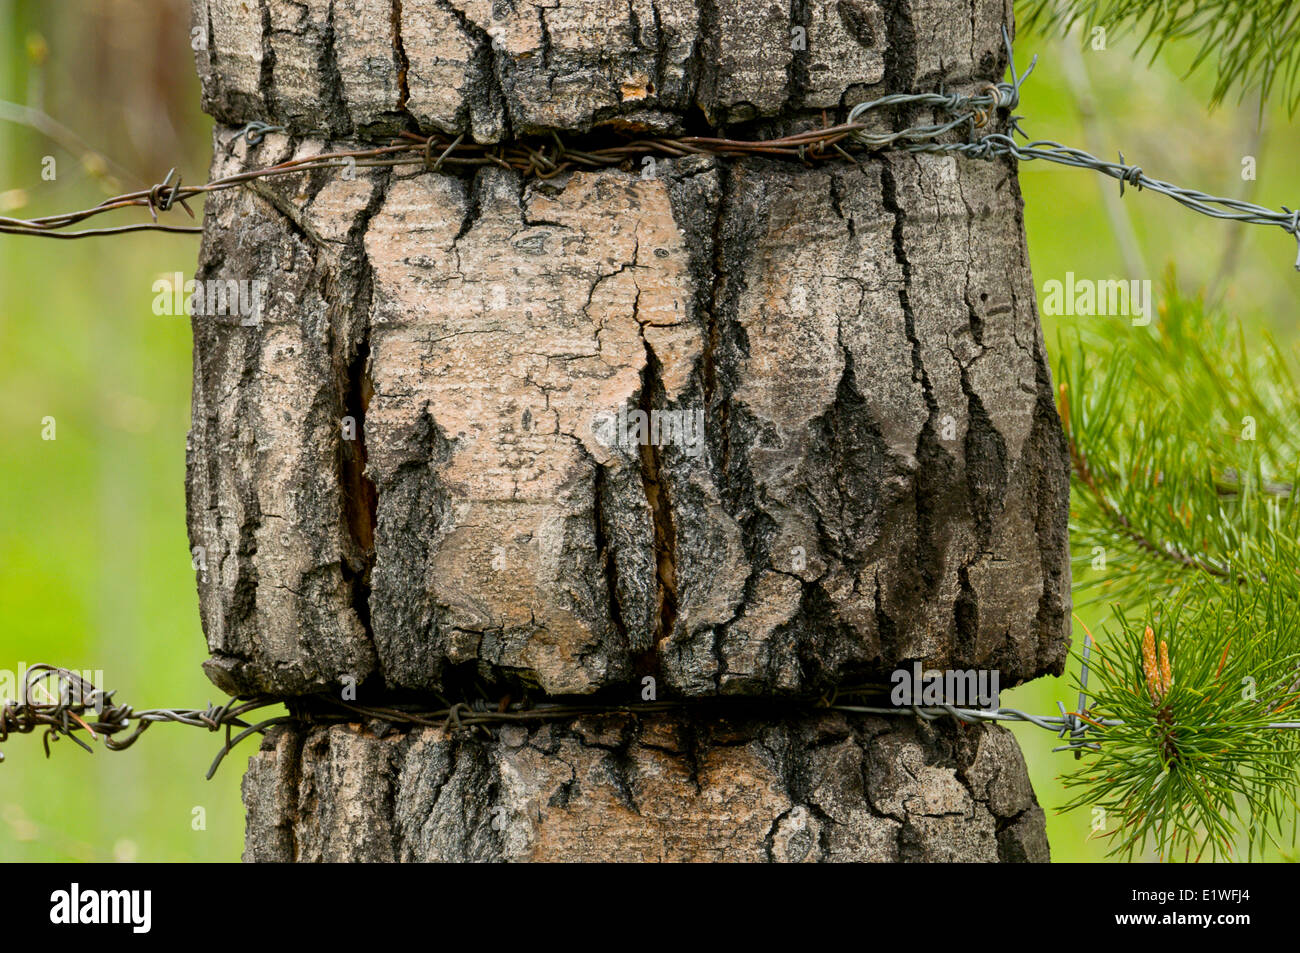 A Trembling Aspen (Populus tremuloides) tree is strangled by barbed wire, British Columbia Stock Photo